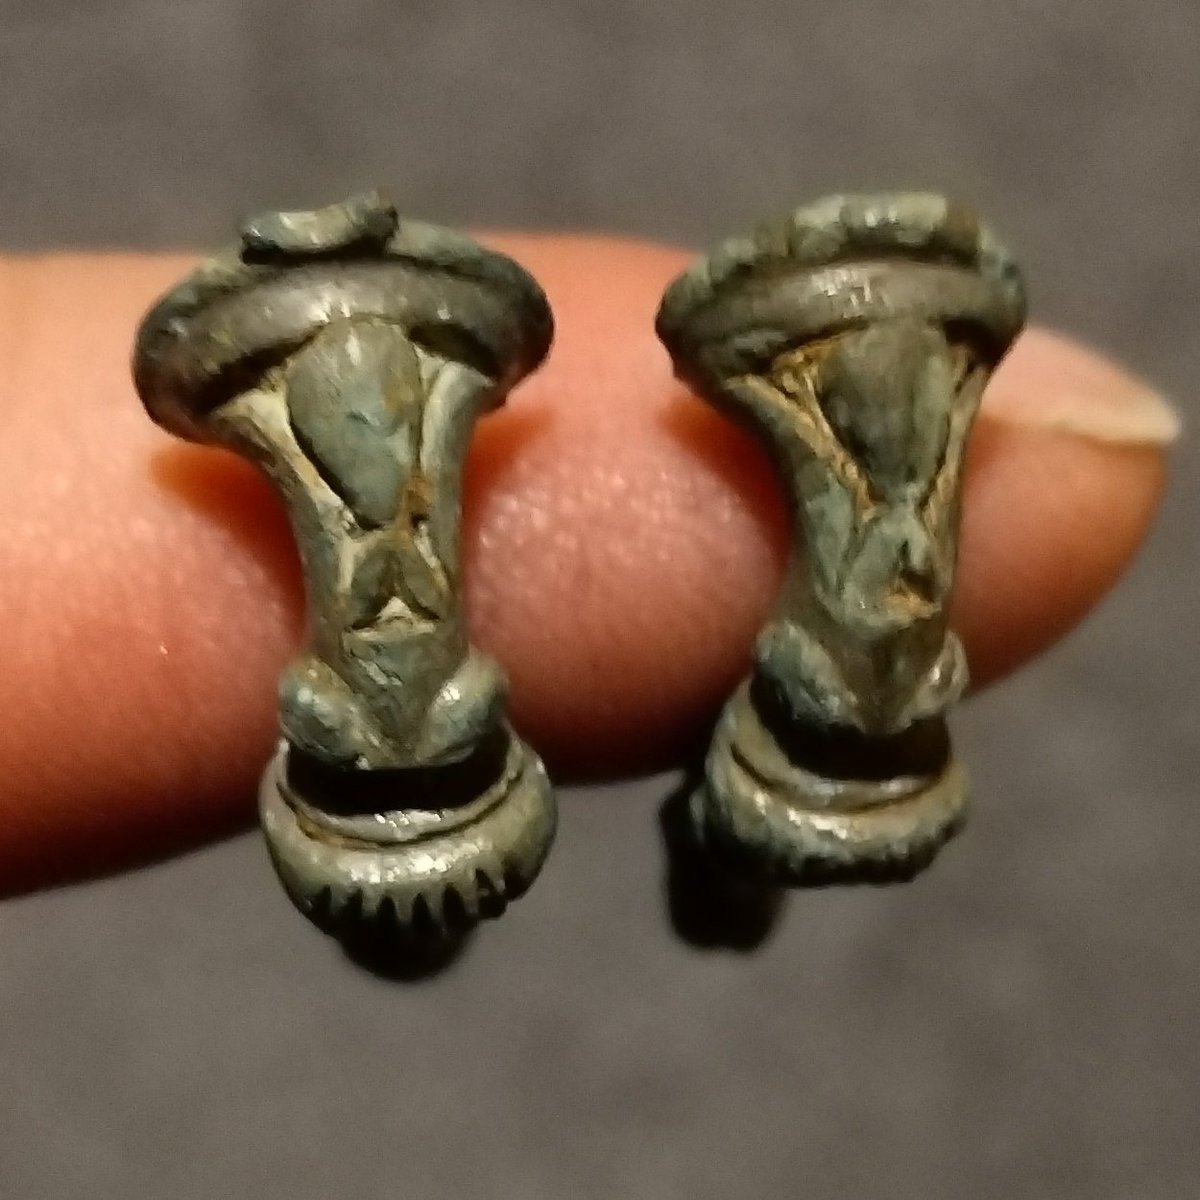 For #FindsFriday, I present an almost identical pair of enamelled Roman trumpet brooches
Dating to the 2nd century AD
Both were found the same day, just 20mts apart, 26th Sept 2018.
12 further brooches from this field, but all Colchester derivates types.

finds.org.uk/database/artef…